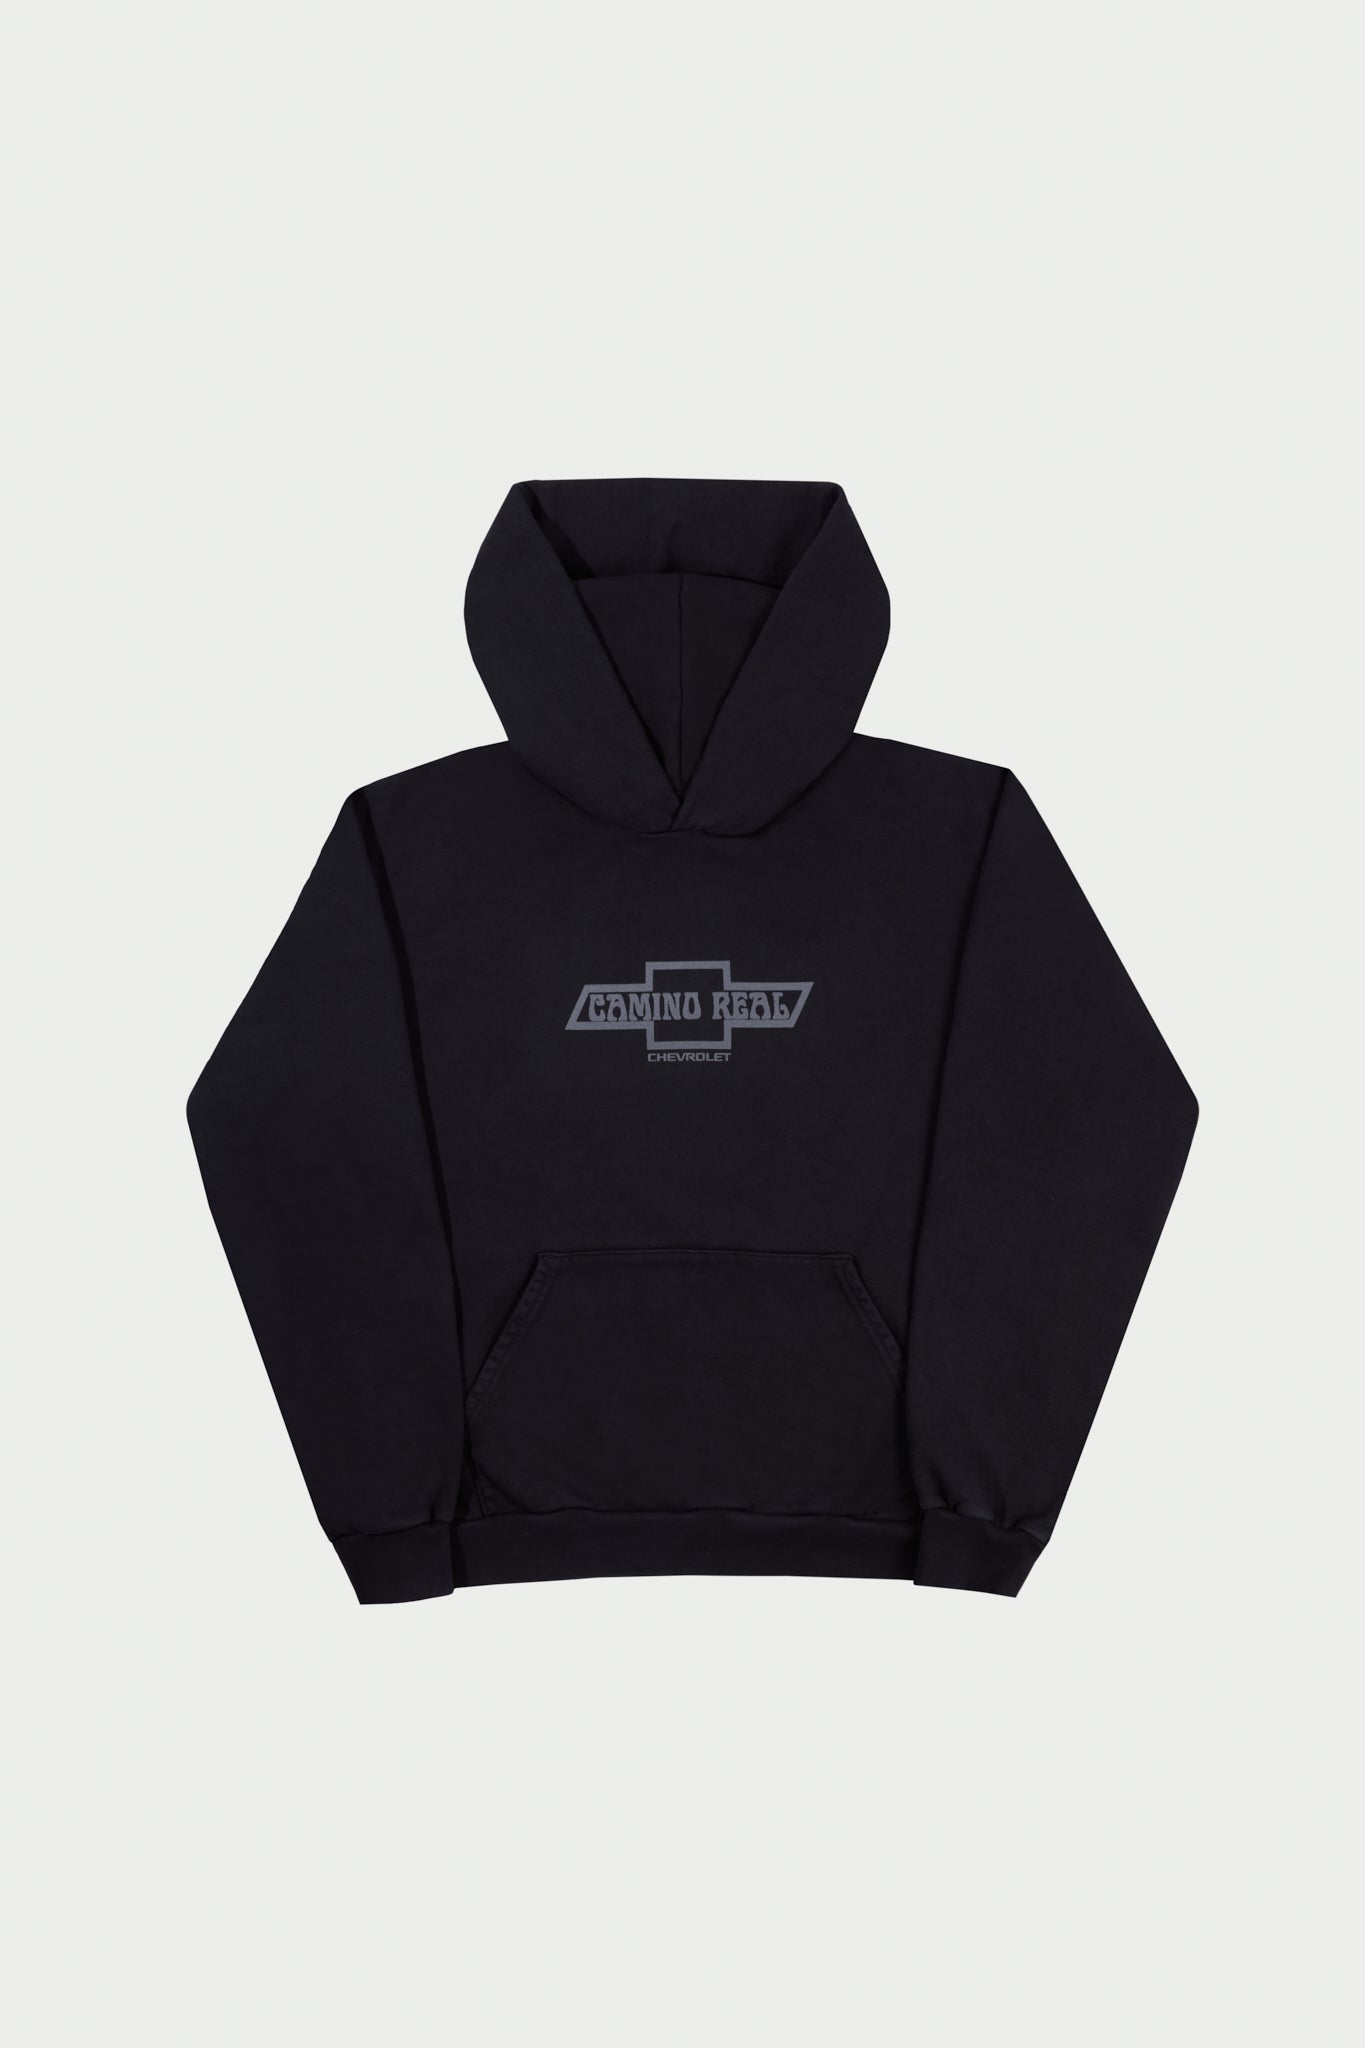 CLASSIC CAMINO REAL CHEVY HOODIE (Vintage Black)